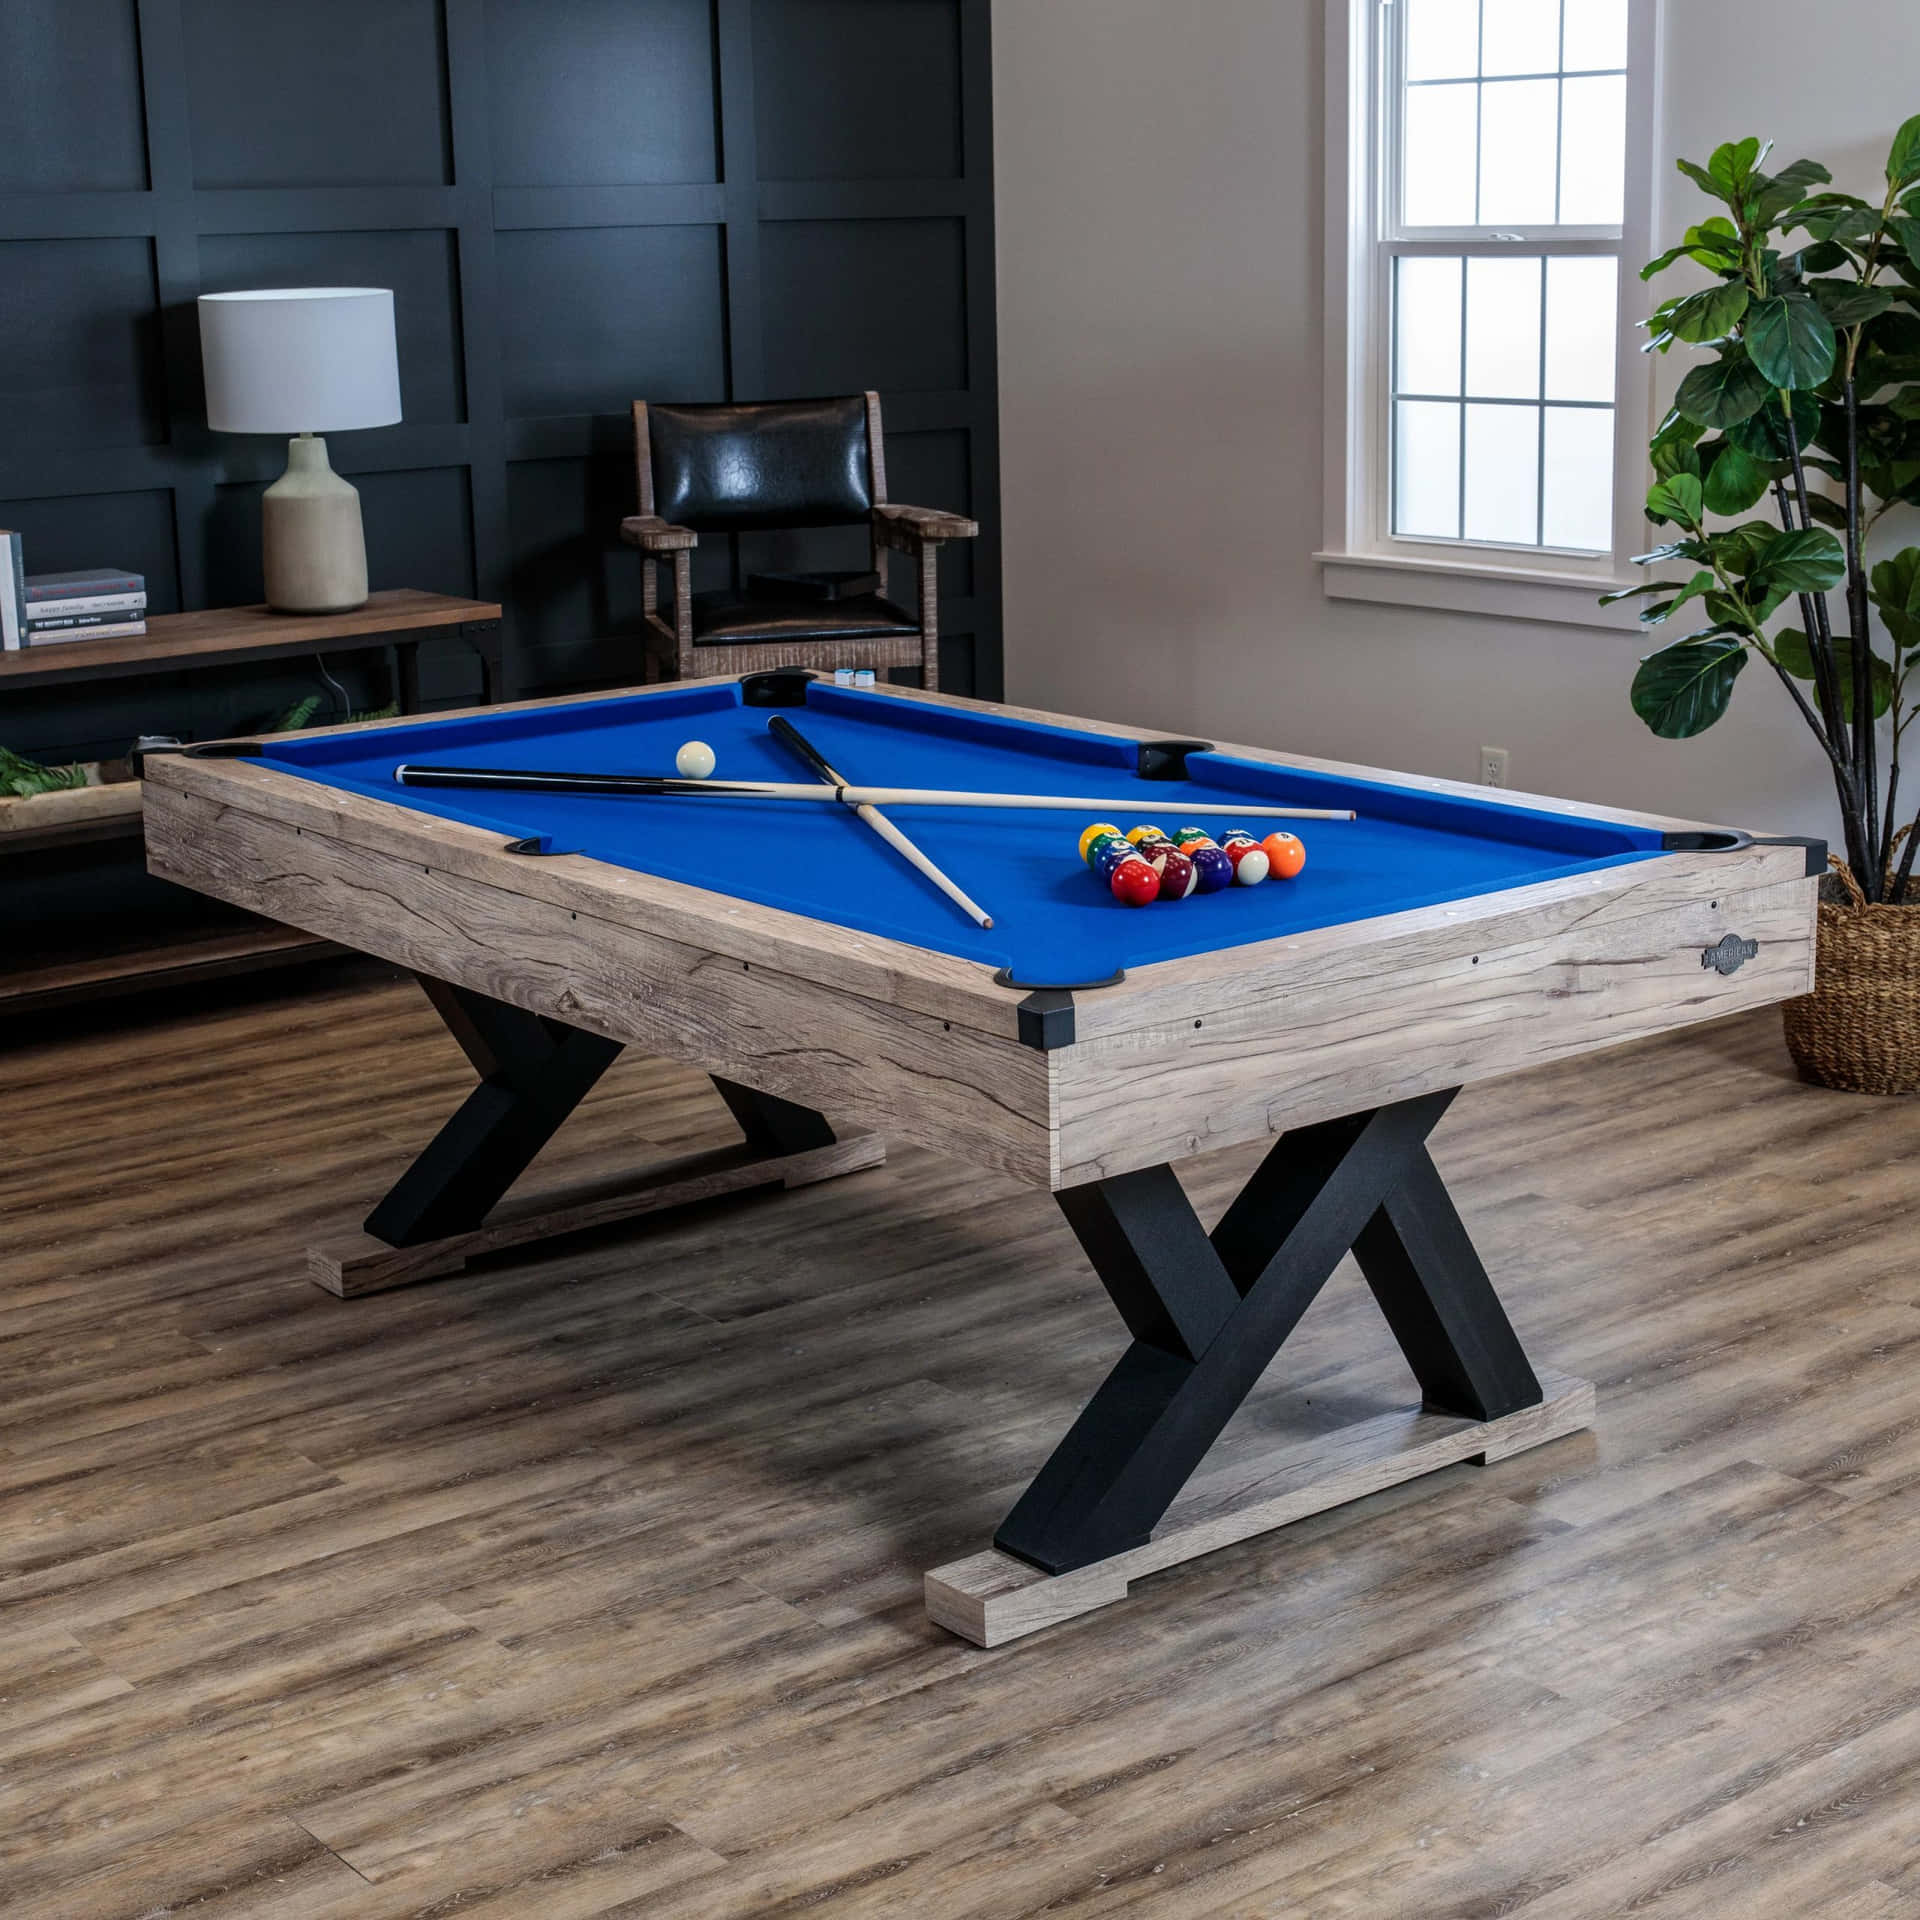 Challenge your friends to a game of billiards